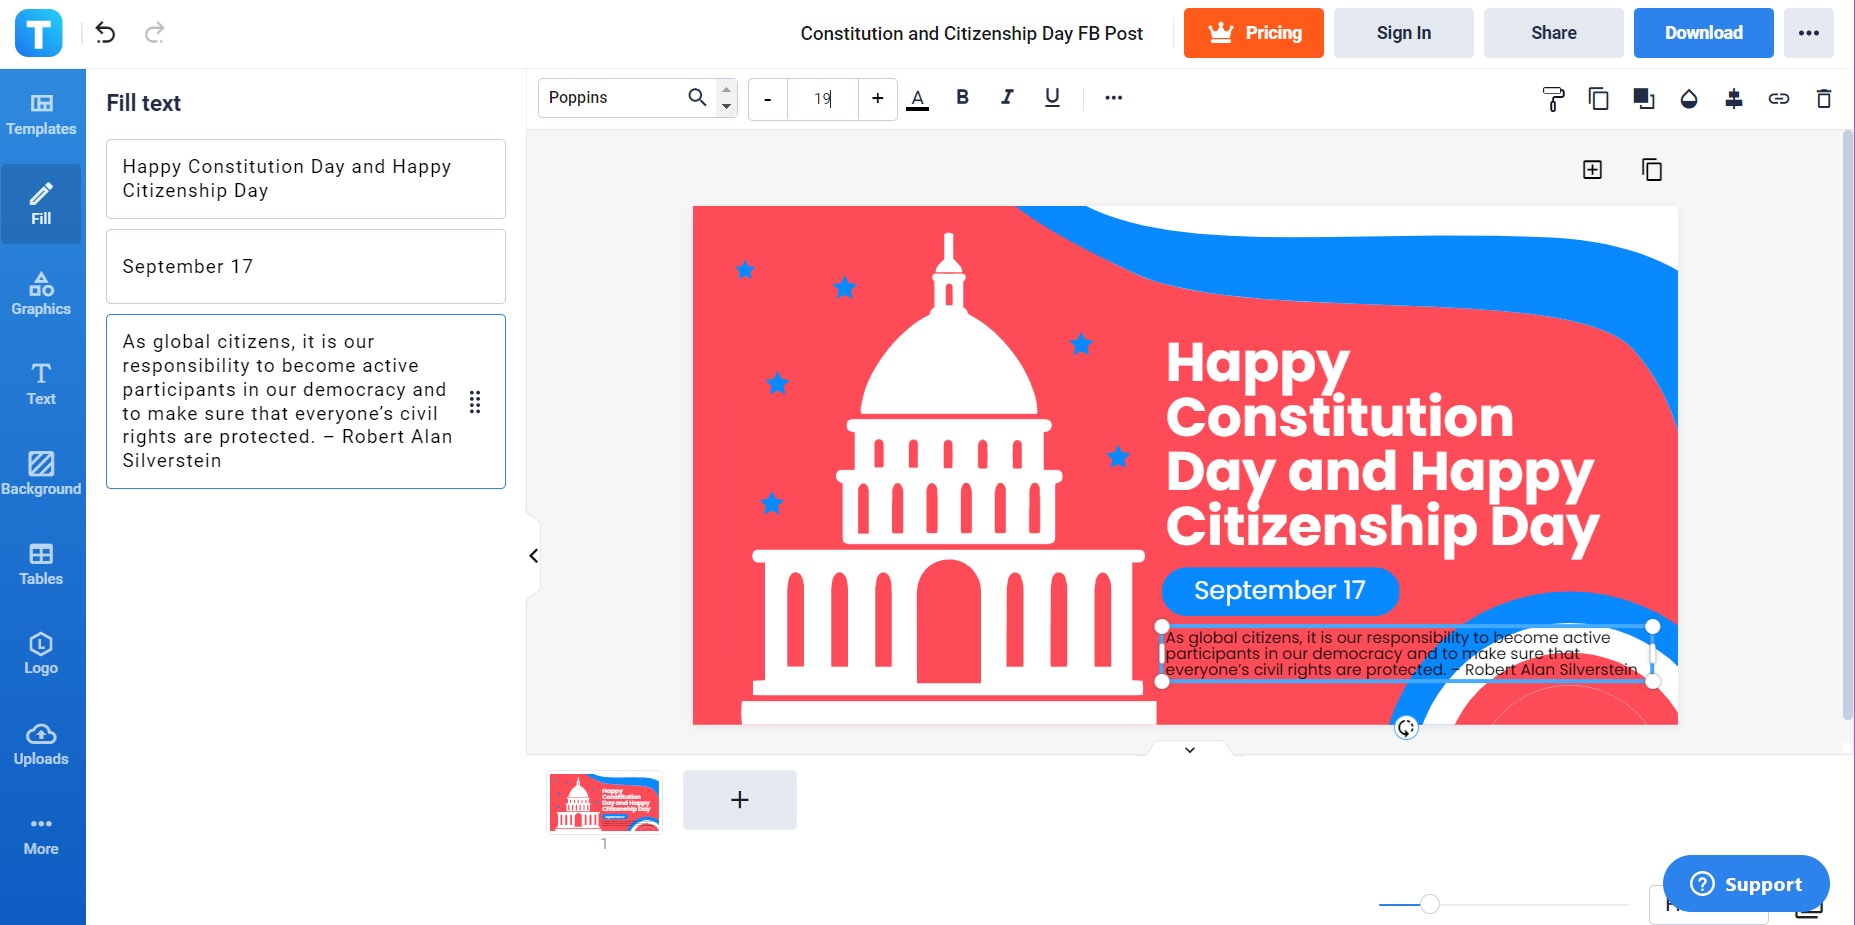 how to create a constitution citizenship day social media post step